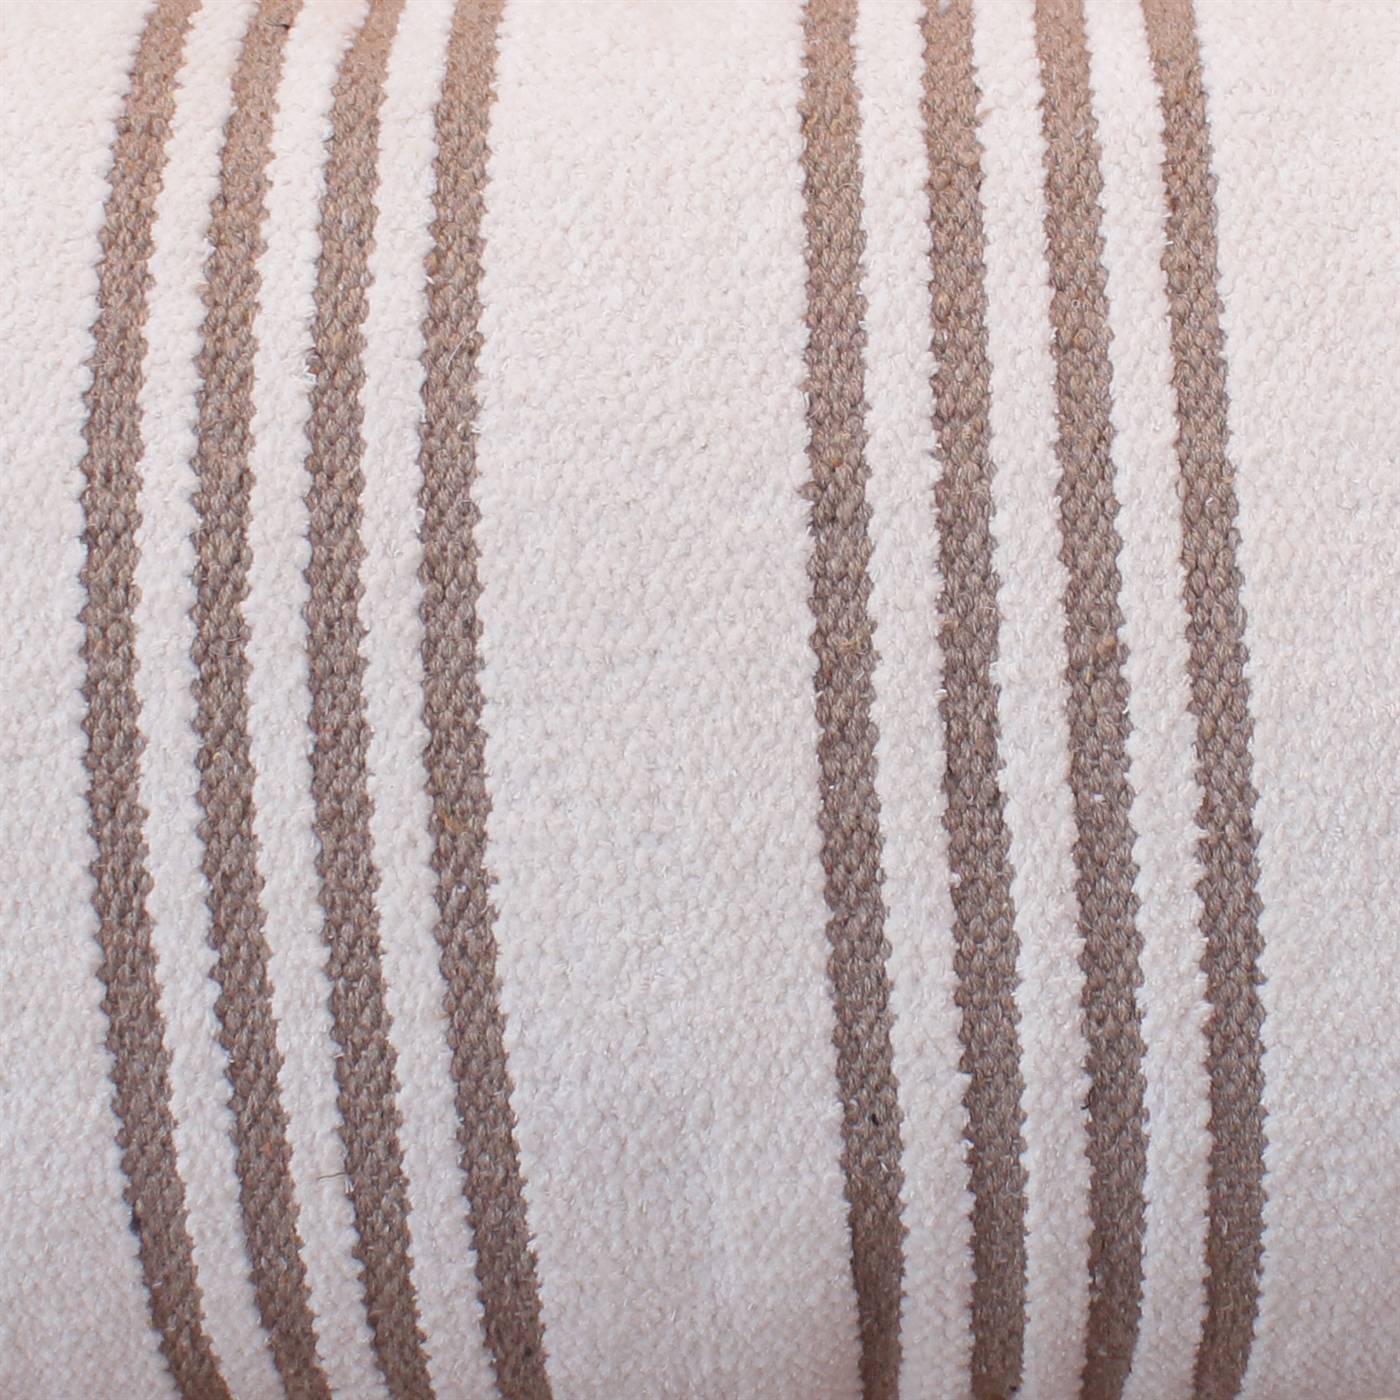 Striped Lumber Cushion, 36x91 cm, Natural White, Beige, Cotton, Chenille, Hand Woven, Pitloom, Flat Weave